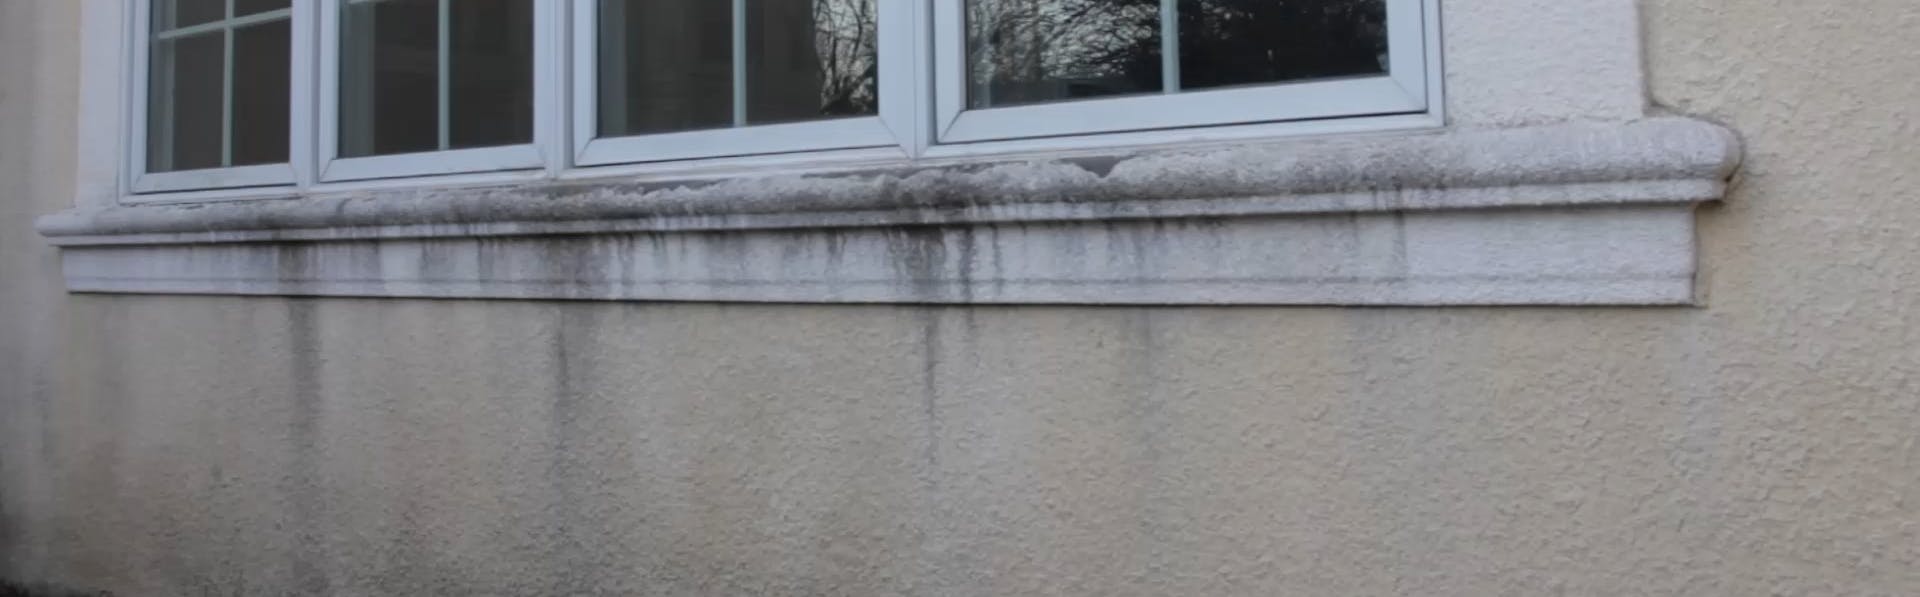 stucco tears are a sign of serious moisture issues